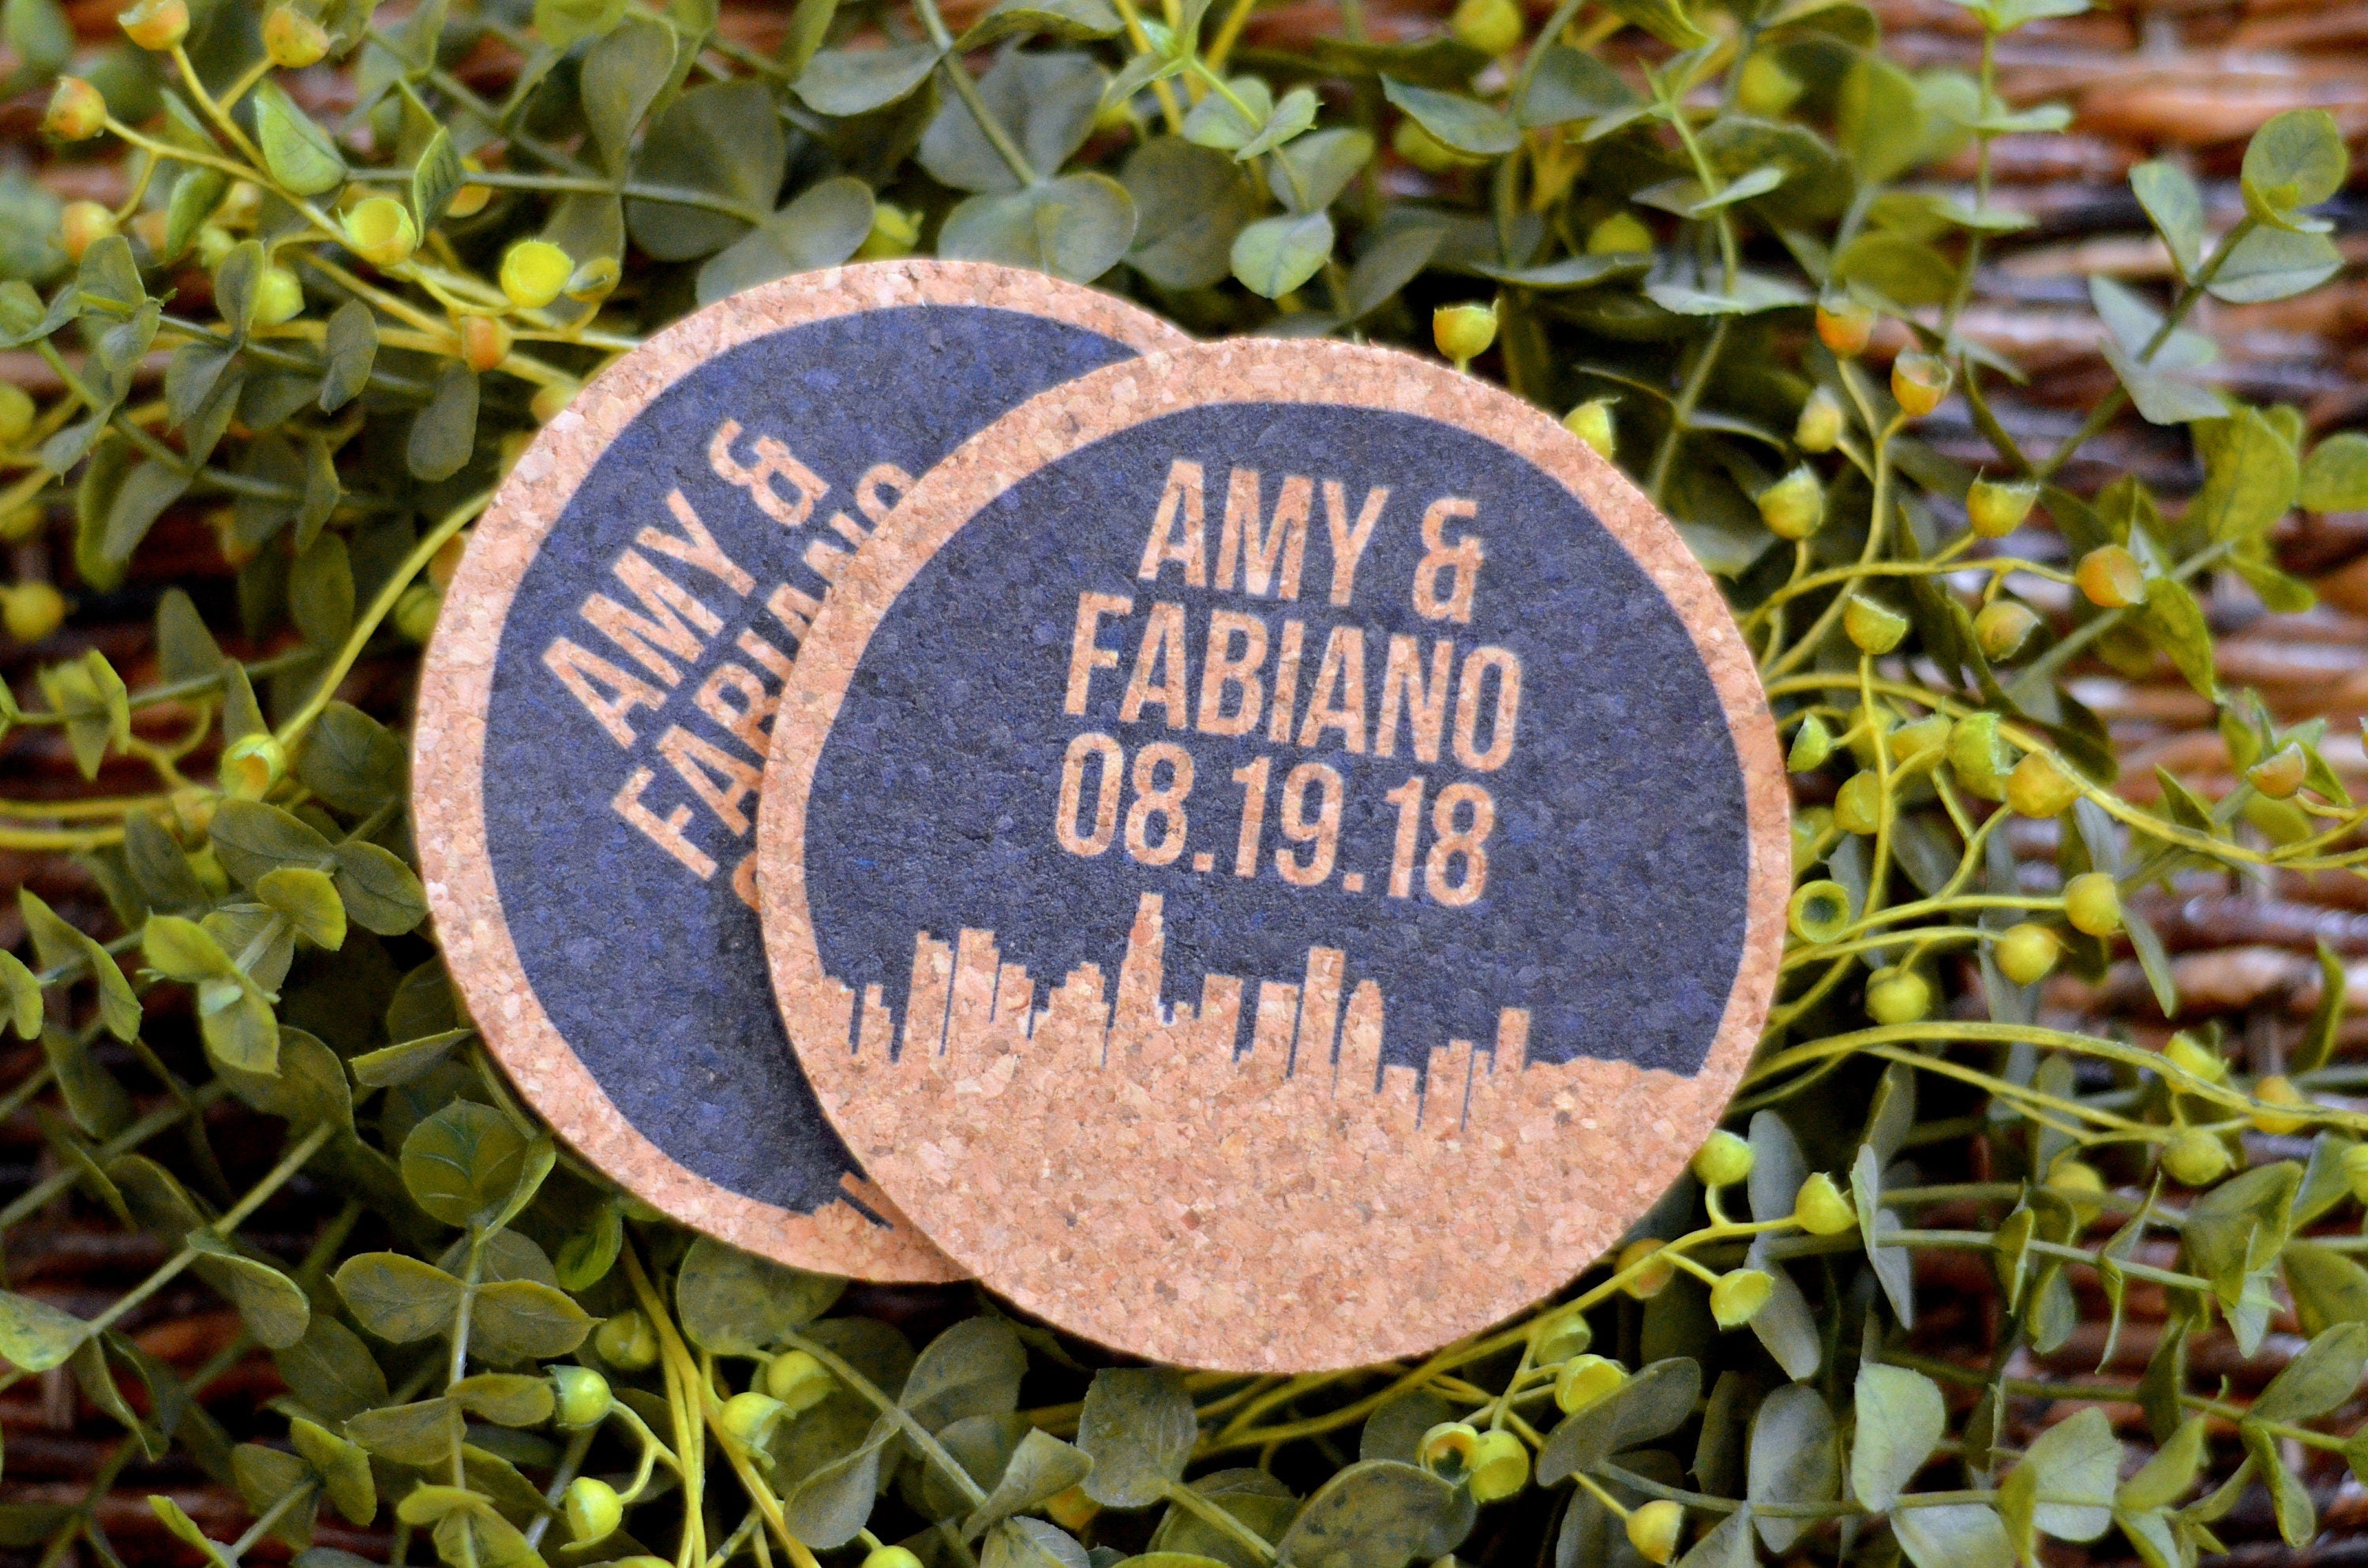 Los Angeles Skyline Wedding Cork Coaster Favors Personalized with Names and Wedding Date // Wedding Reception Cork Coaster Favor